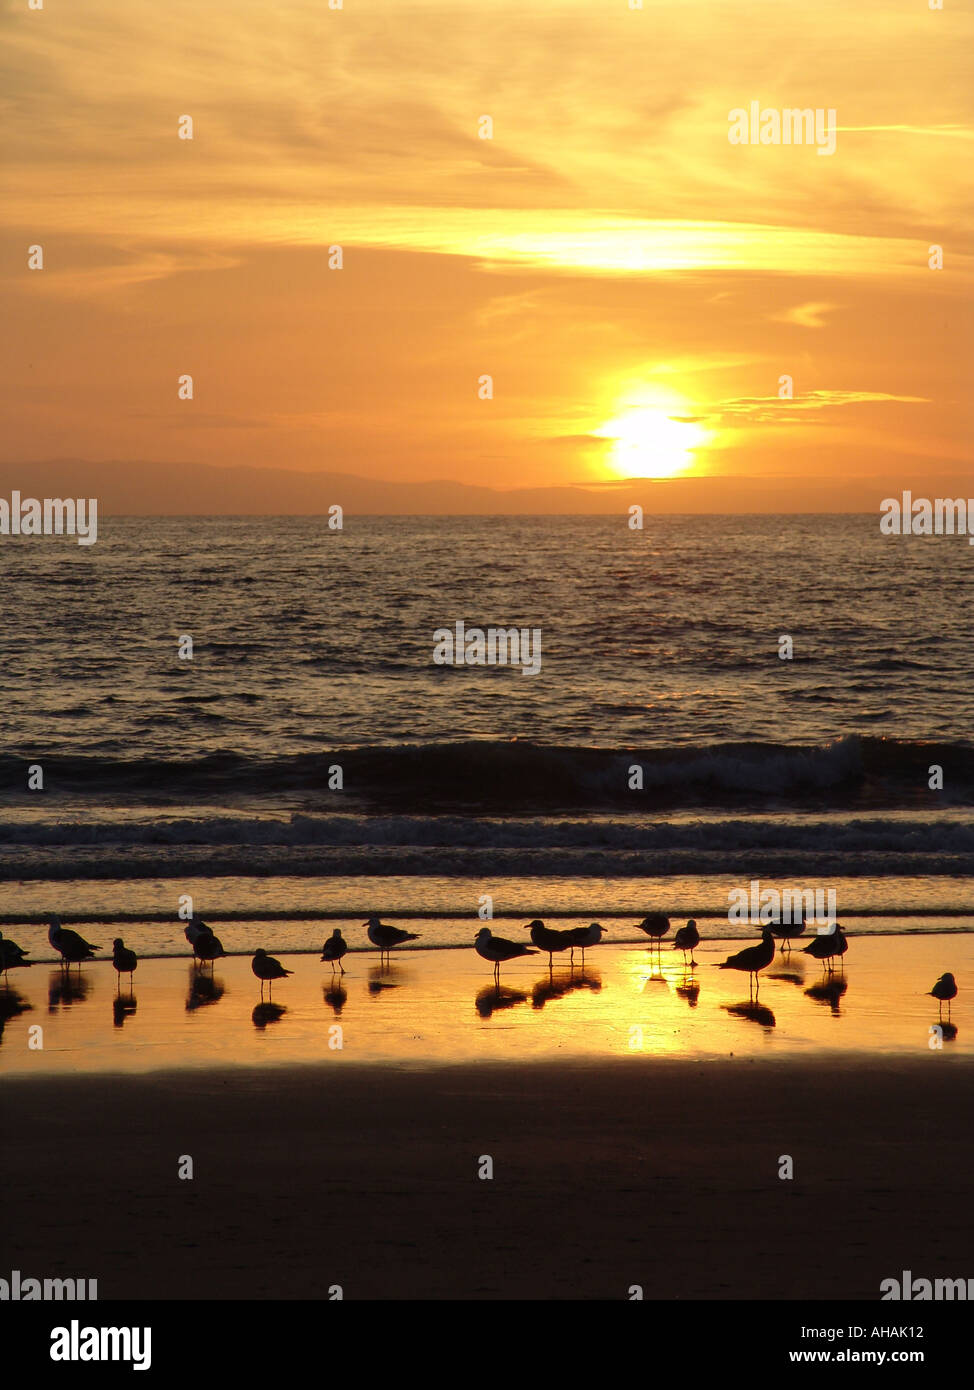 A vibrant image of gulls silhouetted at sunset on the California beach with Catalina Island in the background Stock Photo